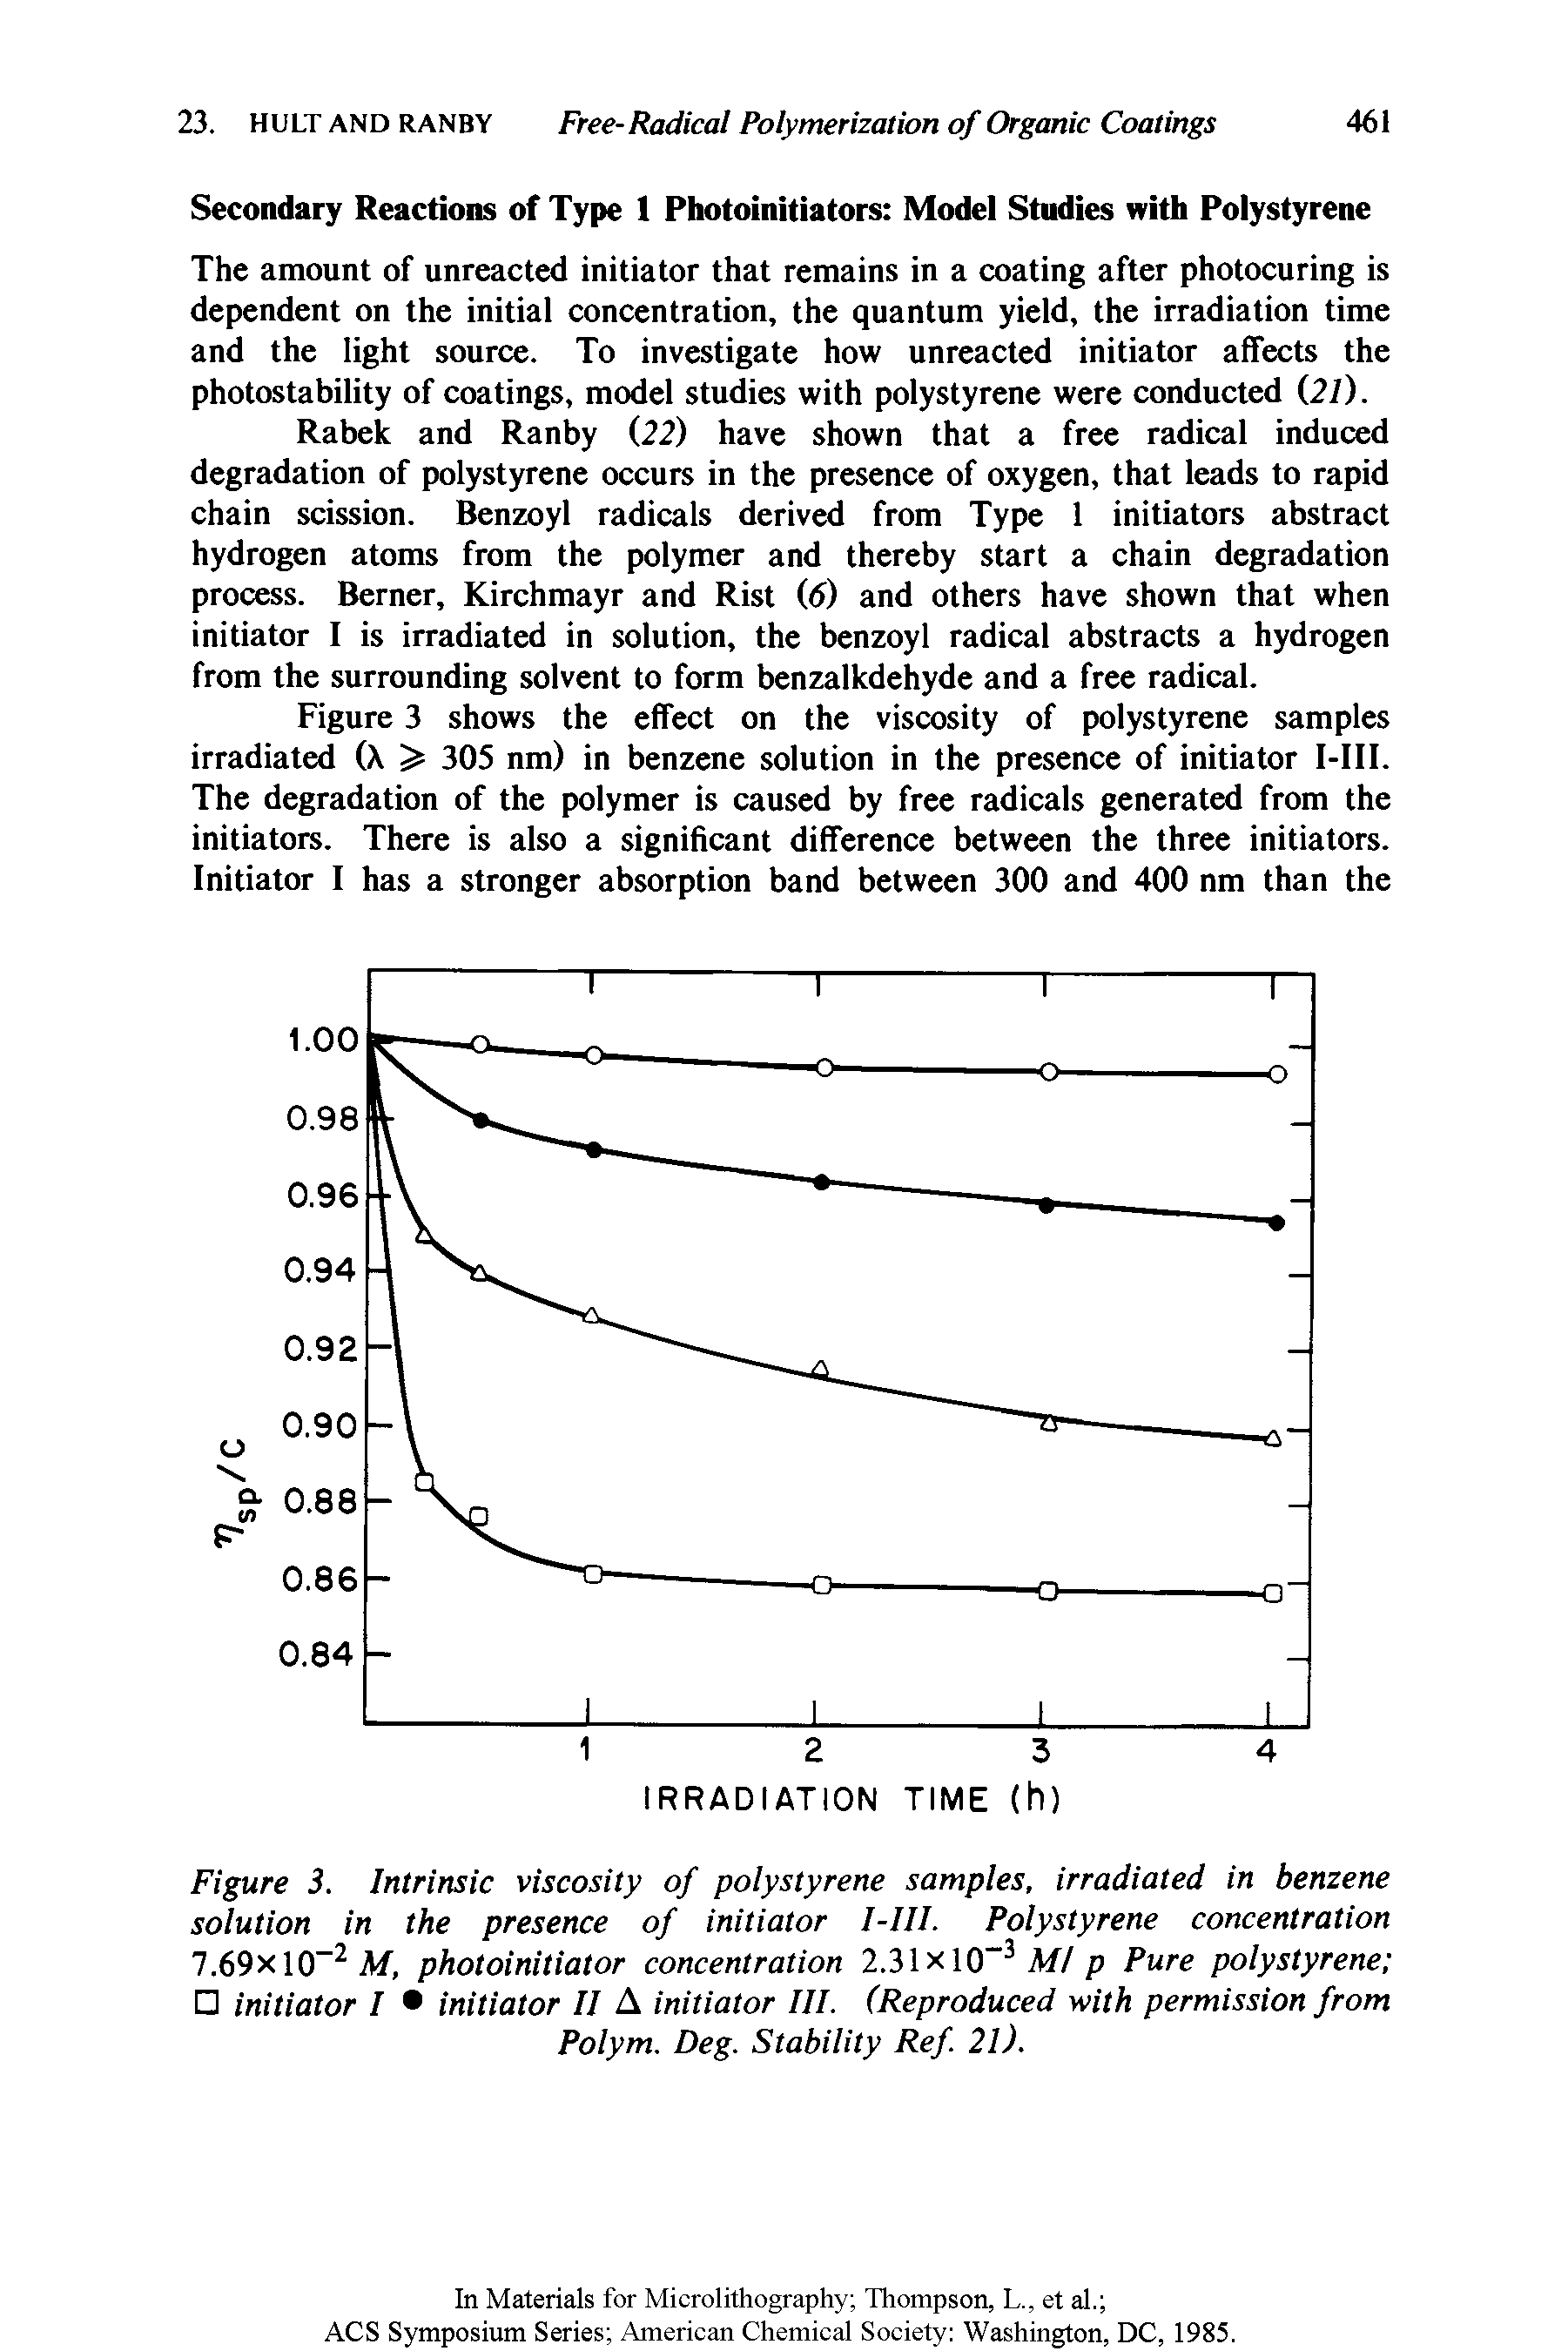 Figure 3. Intrinsic viscosity of polystyrene samples, irradiated in benzene solution in the presence of initiator I-III. Polystyrene concentration 7.69x10 2 M, photoinitiator concentration 2.31 x 10-3 Ml p Pure polystyrene initiator I initiator II A initiator III. (Reproduced with permission from Polym. Deg. Stability Ref. 21).